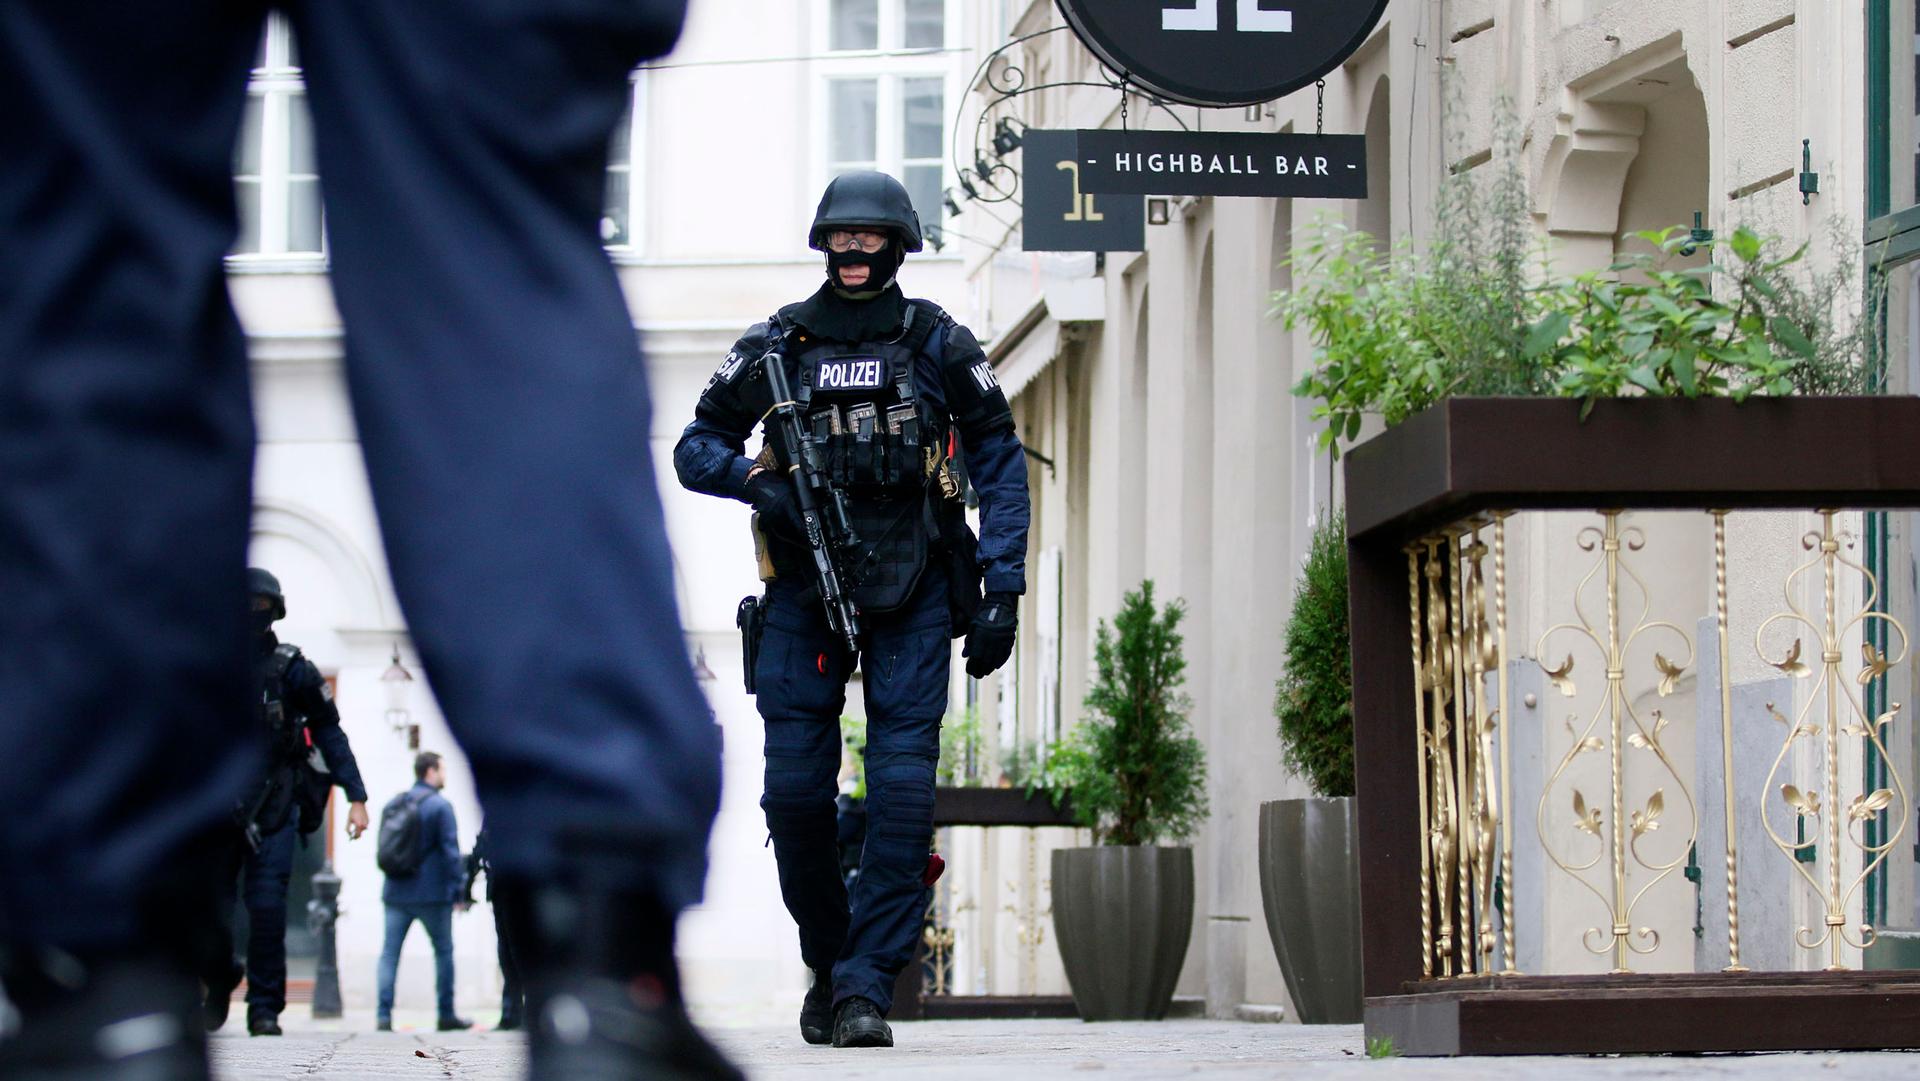 Several heavily armed police officers are shown walking on a street in Vienna with one officer passing a bar.